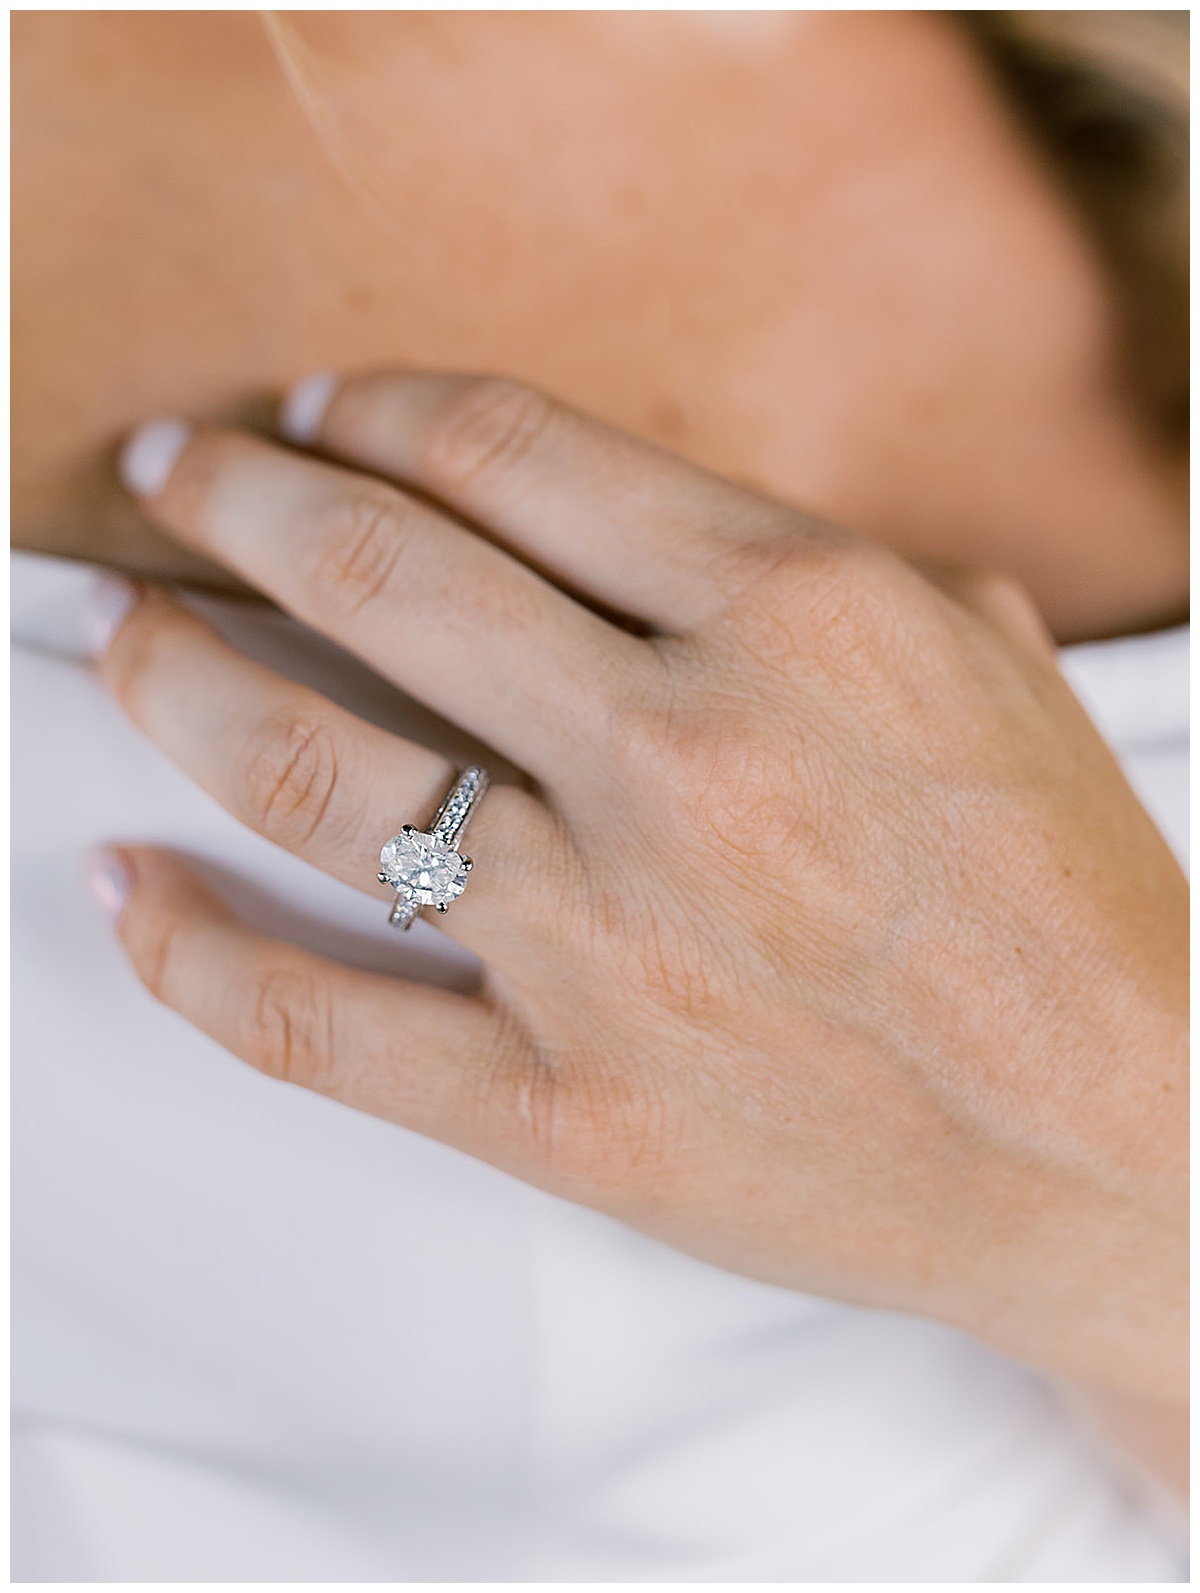 Stunning engagement ring for Meadowbrook Country Club